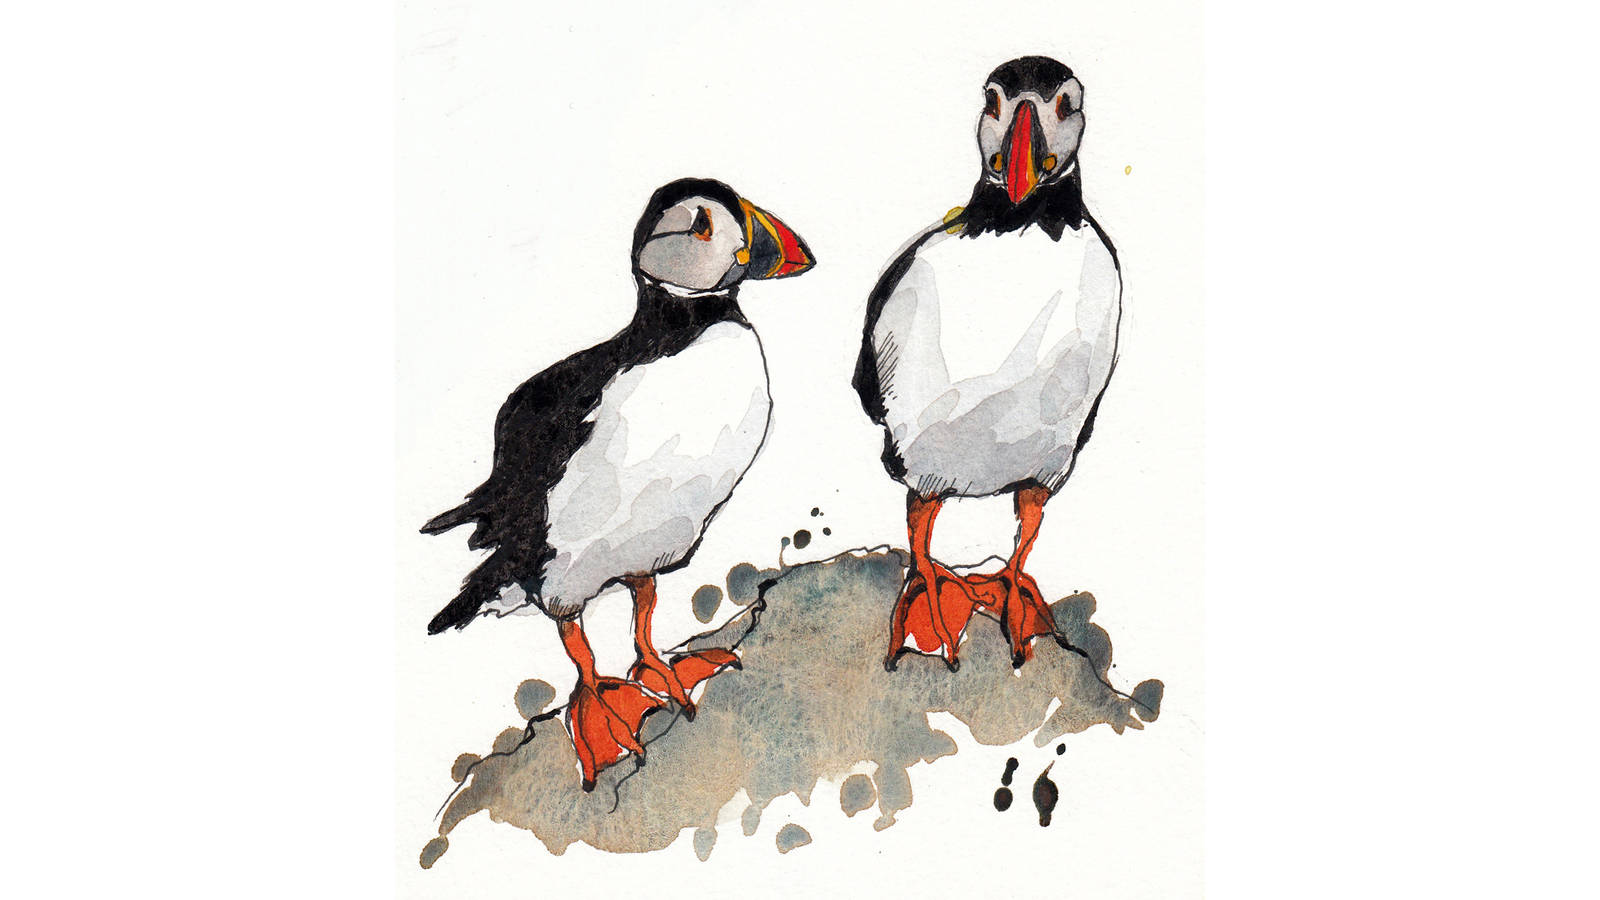 <h3 style="text-align: center; padding: 50px;"><span class="text-Intro-style">We didn’t have time to take a tour boat to see Atlantic puffins, which nest on ocean islands, but I was lucky to see some on a trip to Acadia more than 20 years ago.</span></h3>